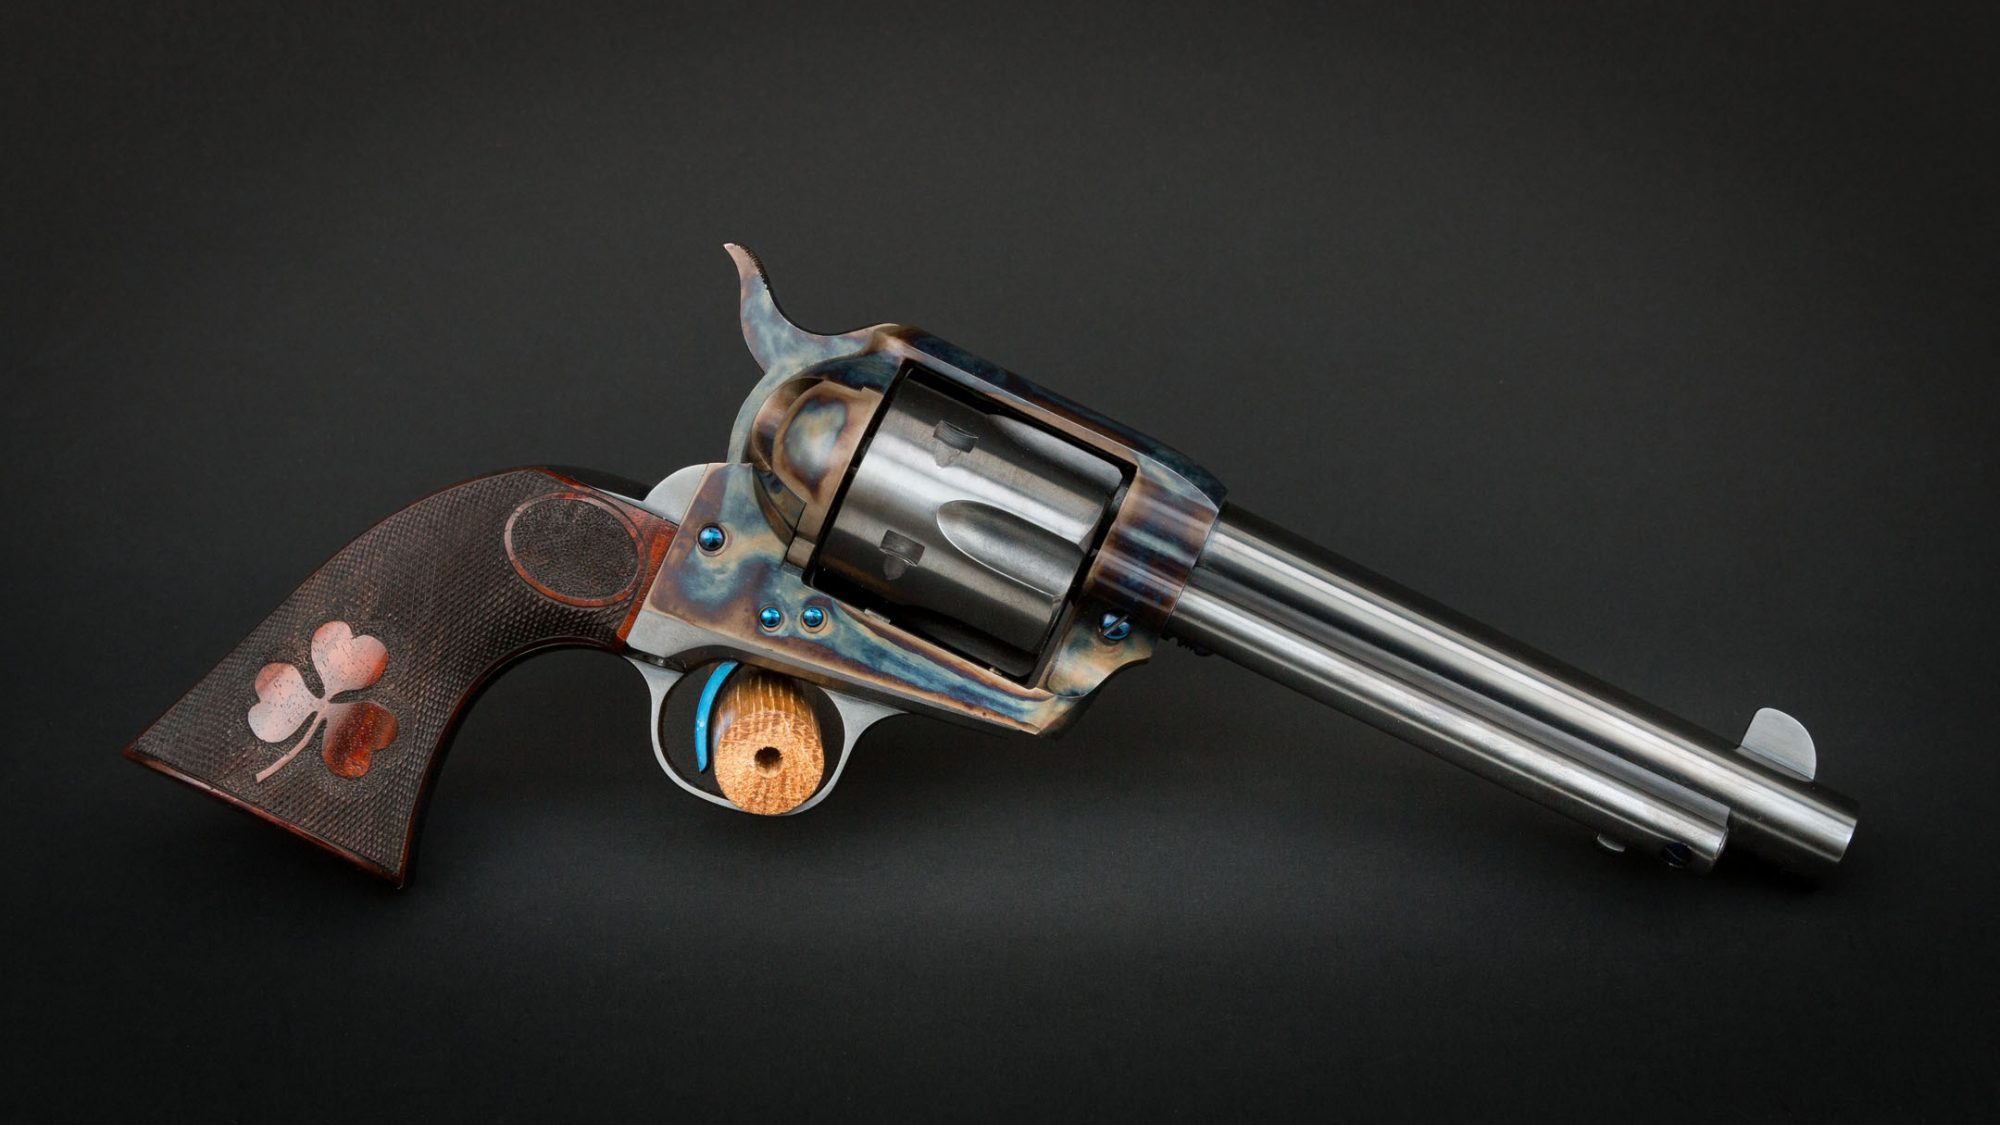 Turnbull SAA Revolver, for sale by Turnbull Restoration of Bloomfield, NY